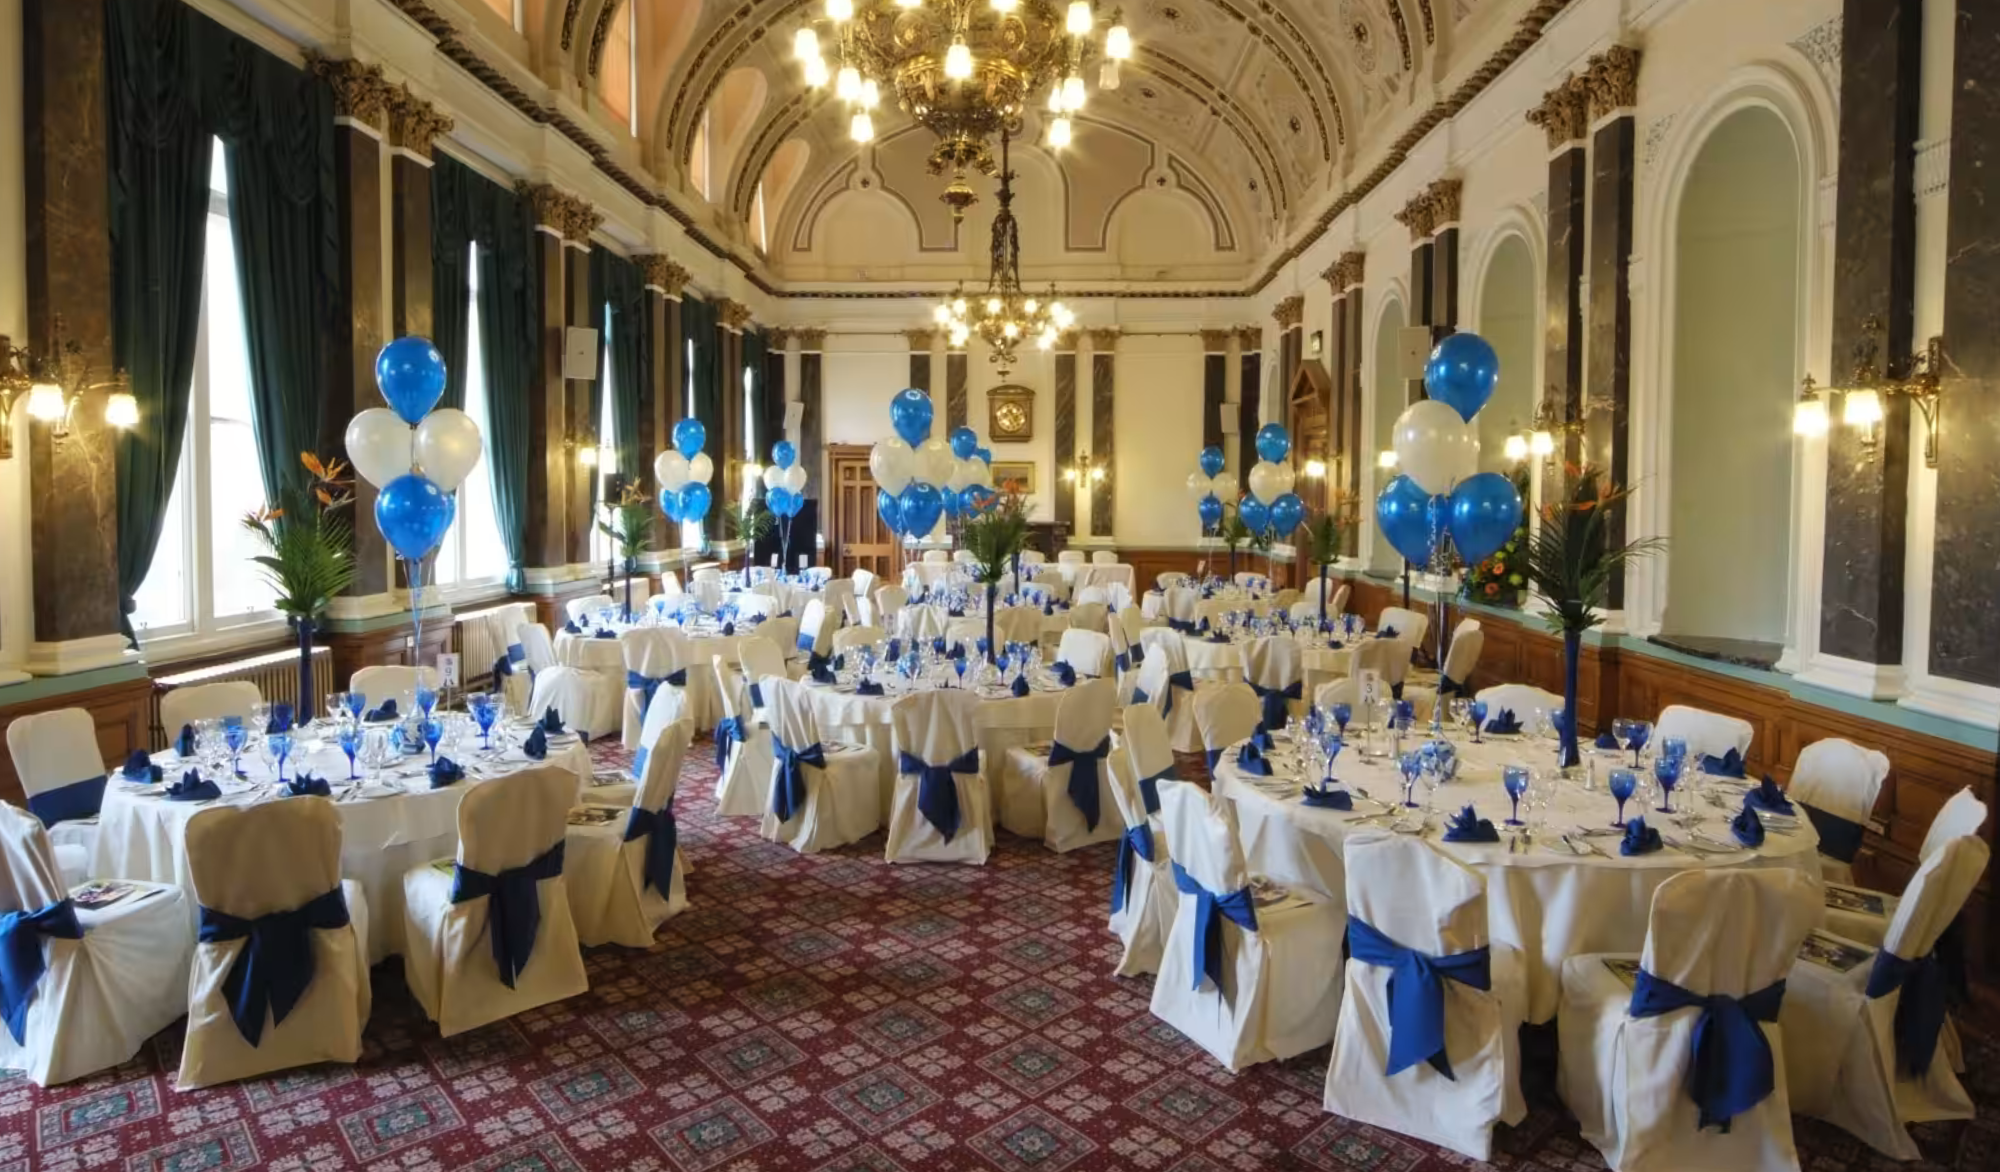 Image of the Banqueting Suite, where the CSS Ball is being held.